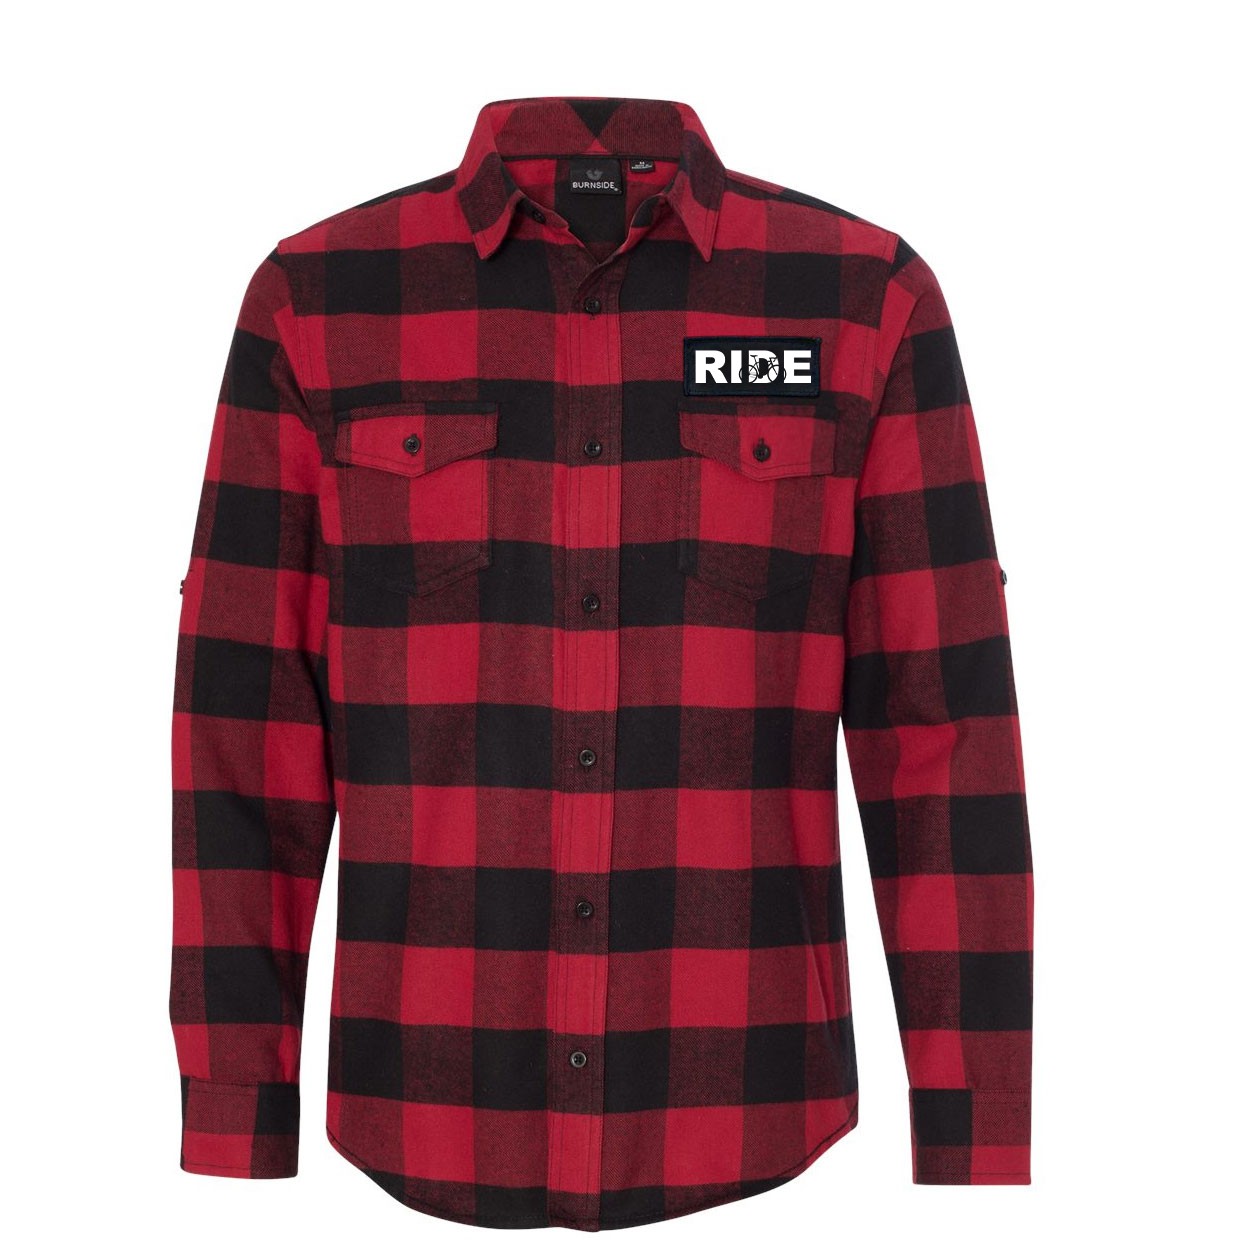 Ride Cycle Logo Classic Unisex Long Sleeve Woven Patch Flannel Shirt Red/Black Buffalo (White Logo)